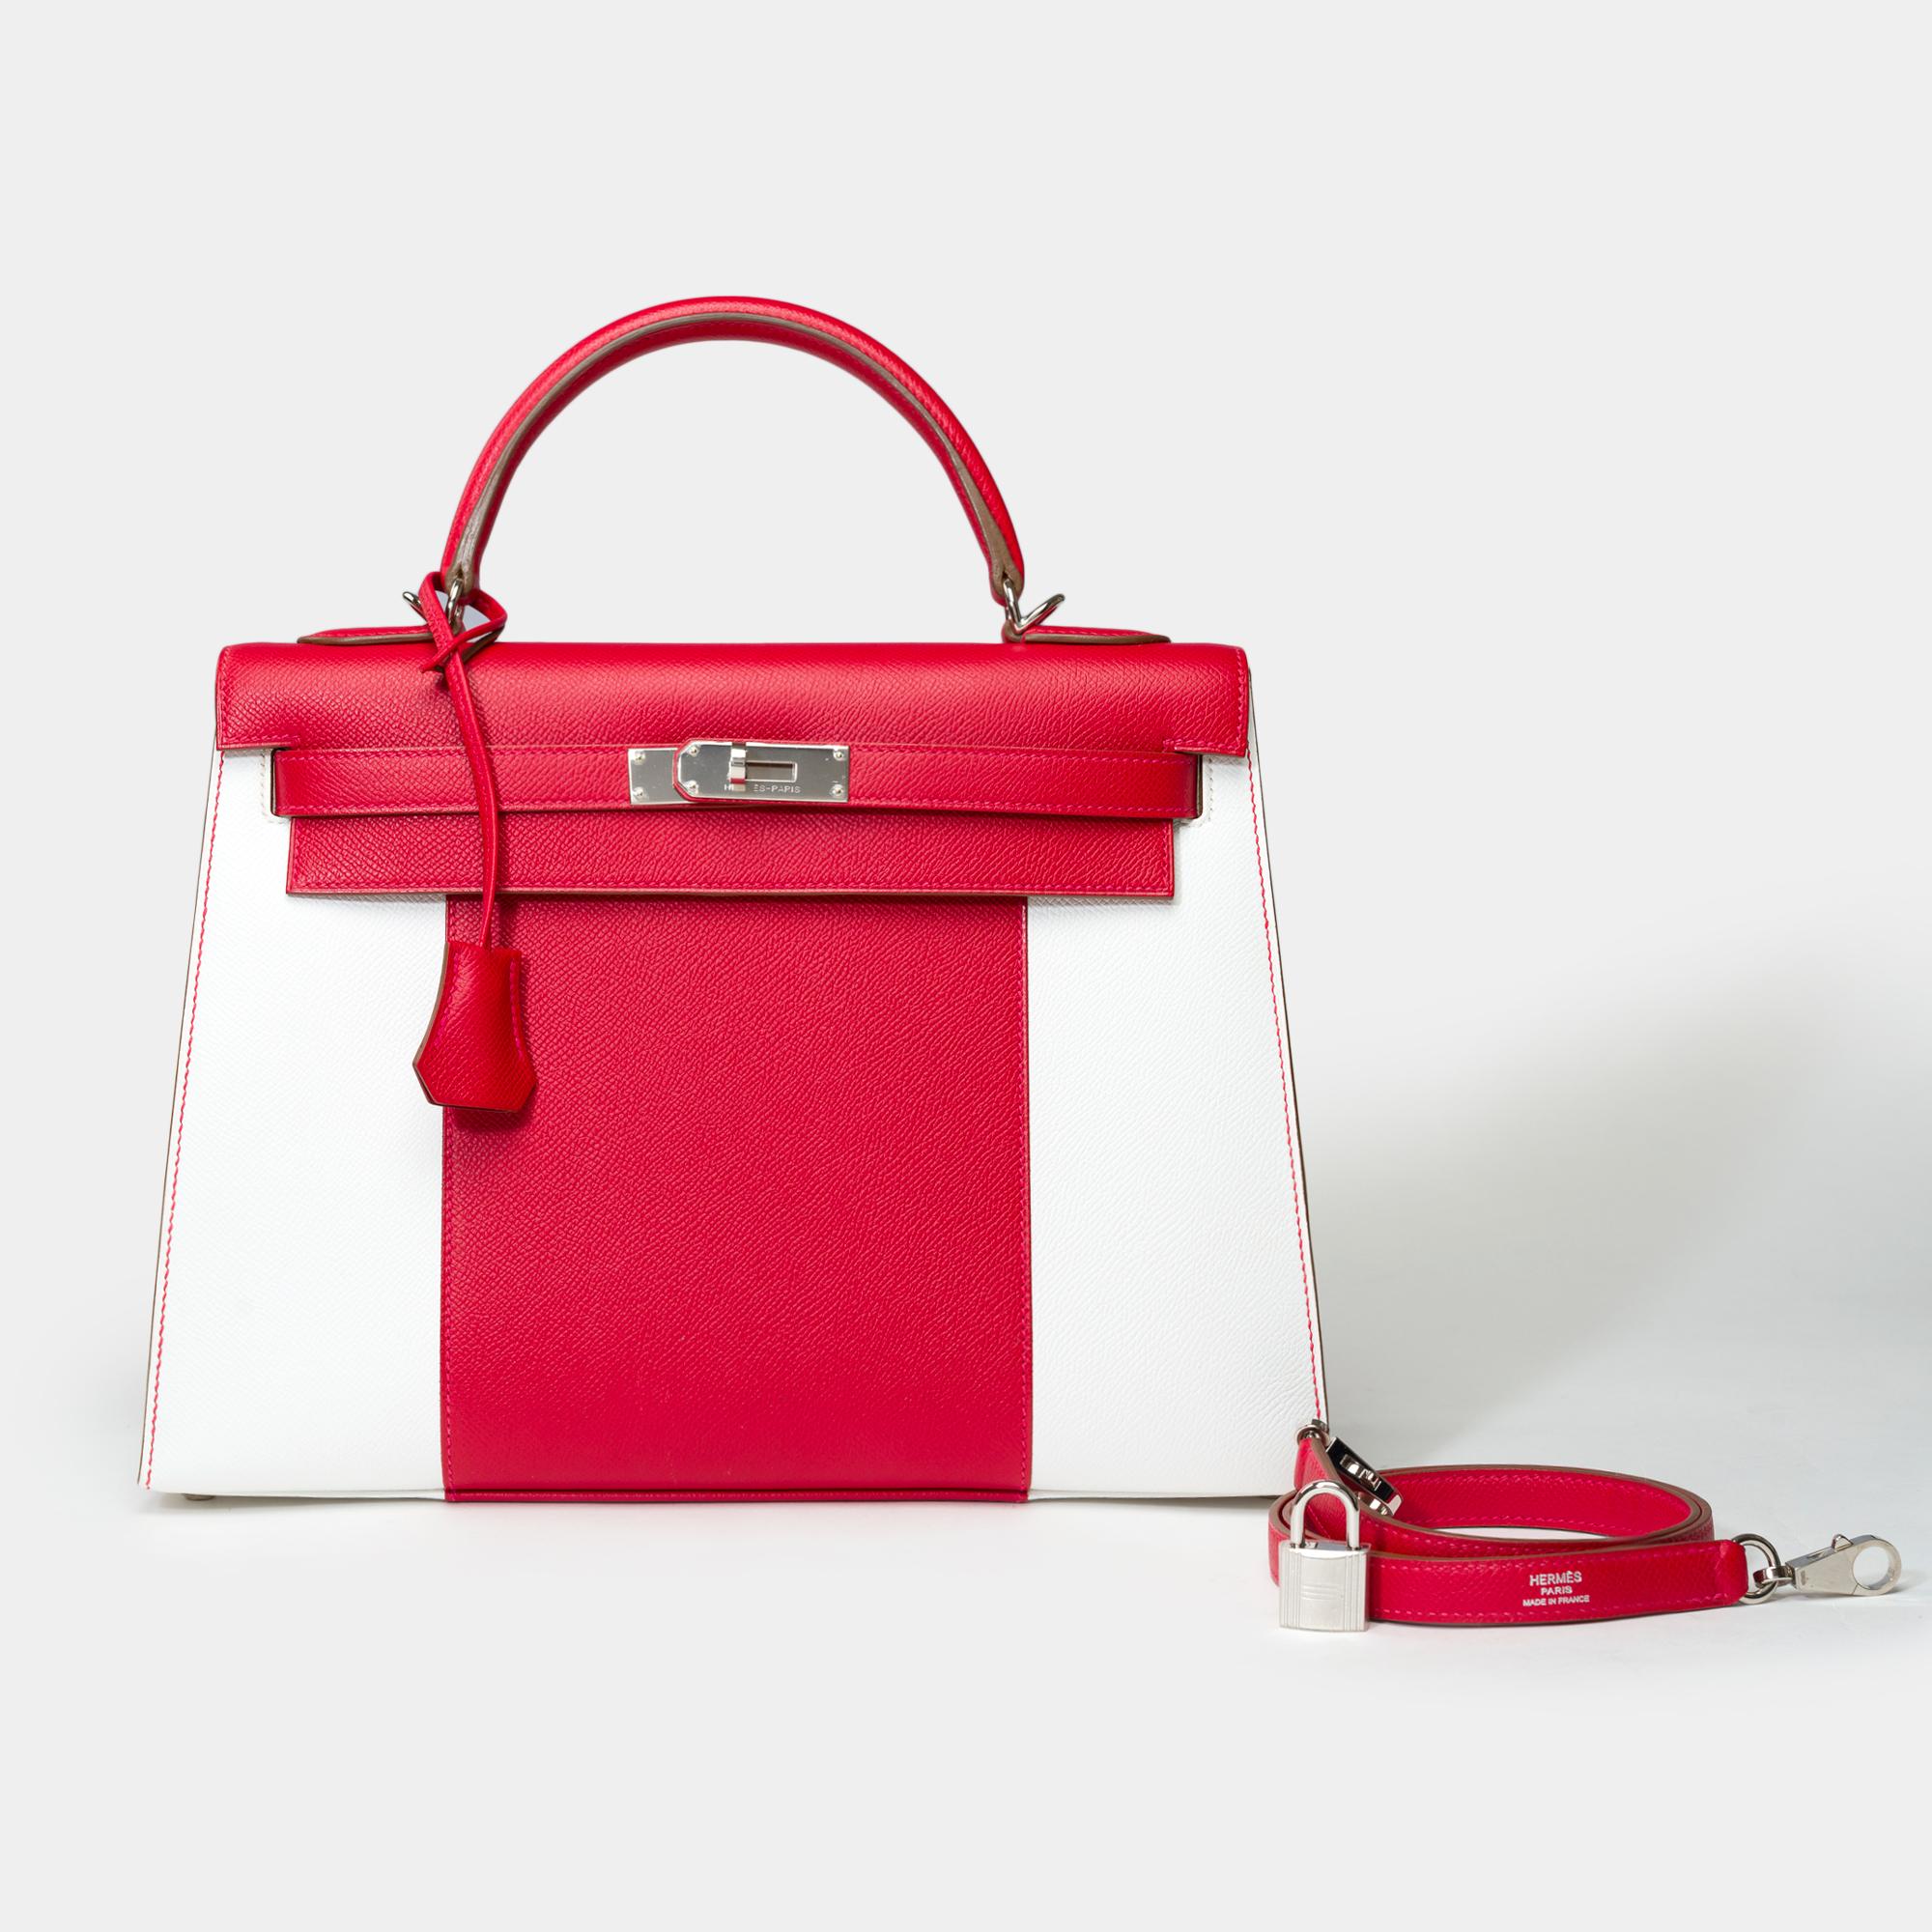 ULTRA​ ​RARE/COLLECTIBLE​ ​KELLY​ ​FLAG

Splendid​ ​&​ ​Rare​ ​Hermes​ ​Kelly​ ​32​ ​sellier​ ​handbag​ ​strap​ ​Flag​ ​limited​ ​edition​ ​in​ ​white​ ​and​ ​casaque​ ​red​ ​epsom​ ​leather​ ​,​ ​palladium​ ​silver​ ​metal​ ​trim,​ ​red​ ​leather​